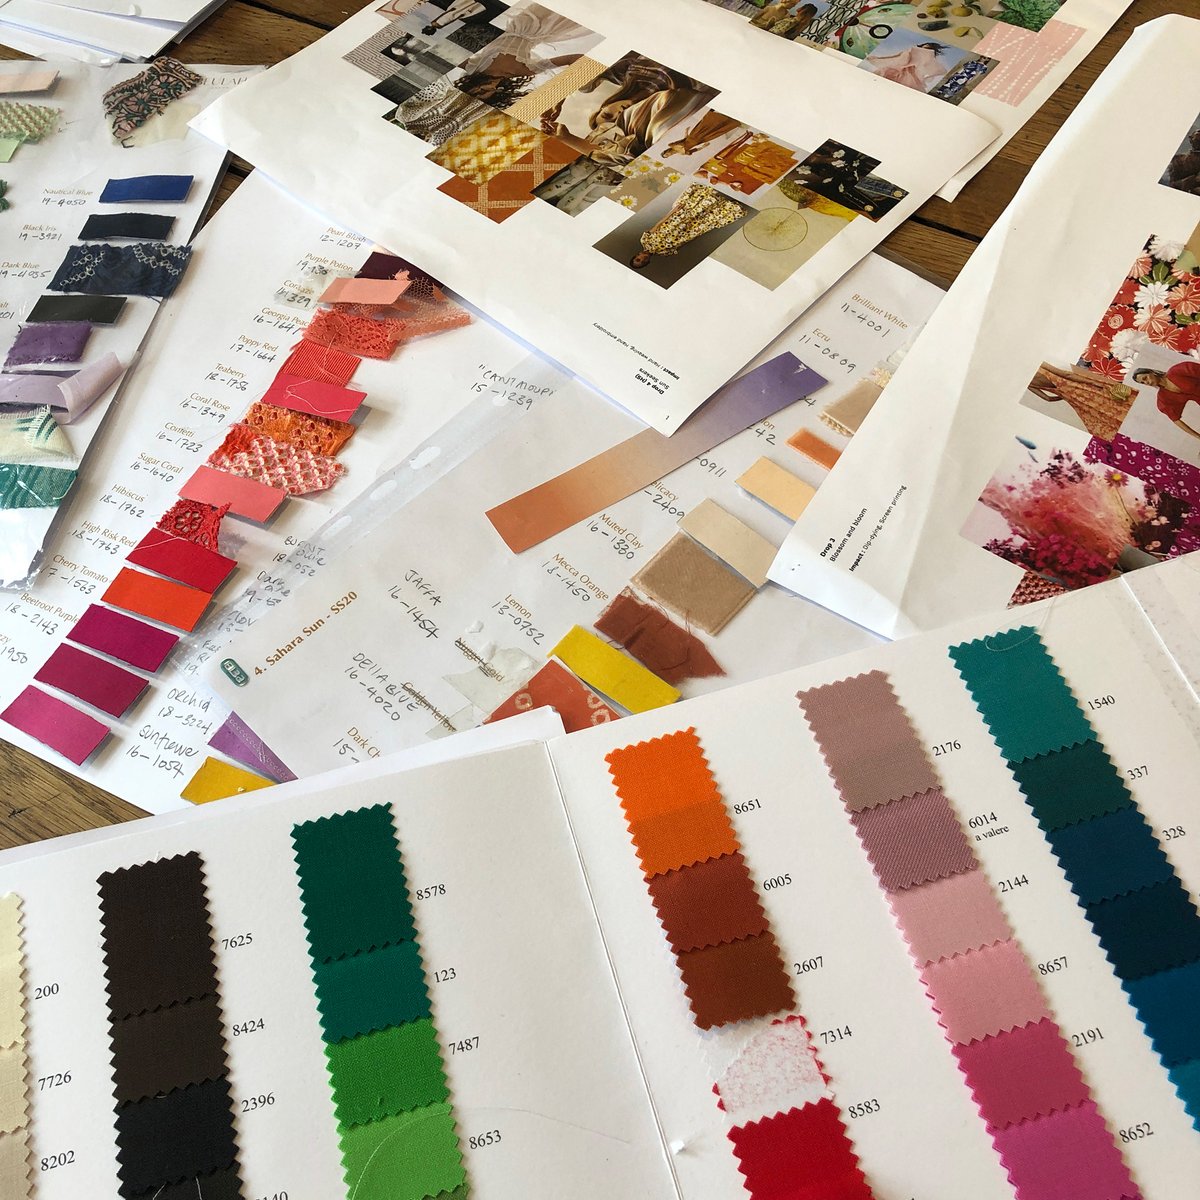 Mood board, colours and inspiration for our Summer 2020 collection. Our Summer collection is now available to shop online at beulahlondon.com #ethicalfashion #summer2020